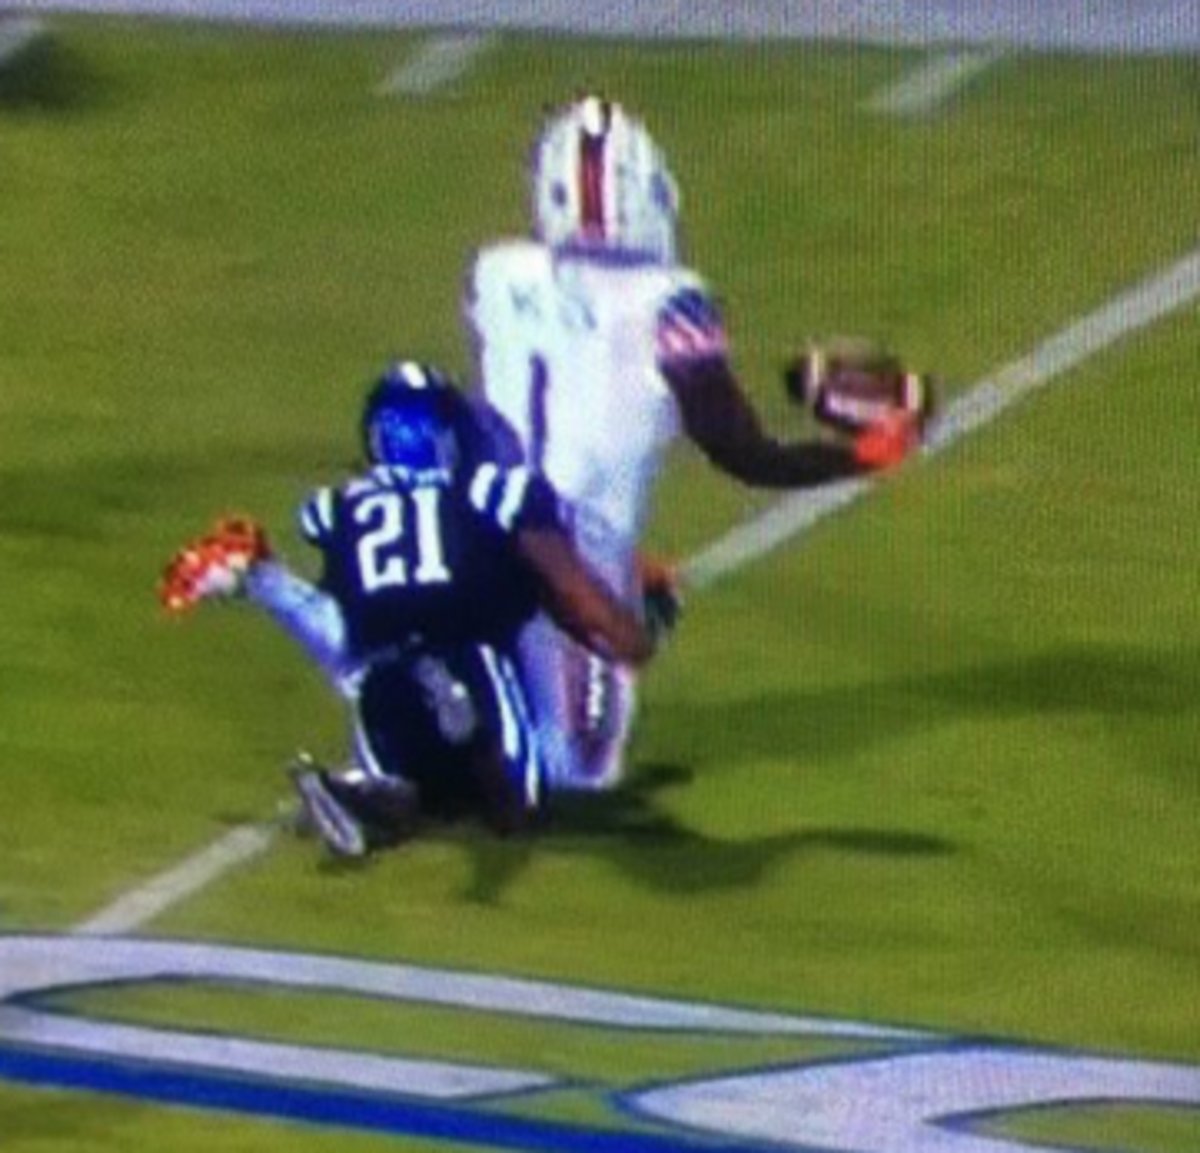 Miami football player is seen down.